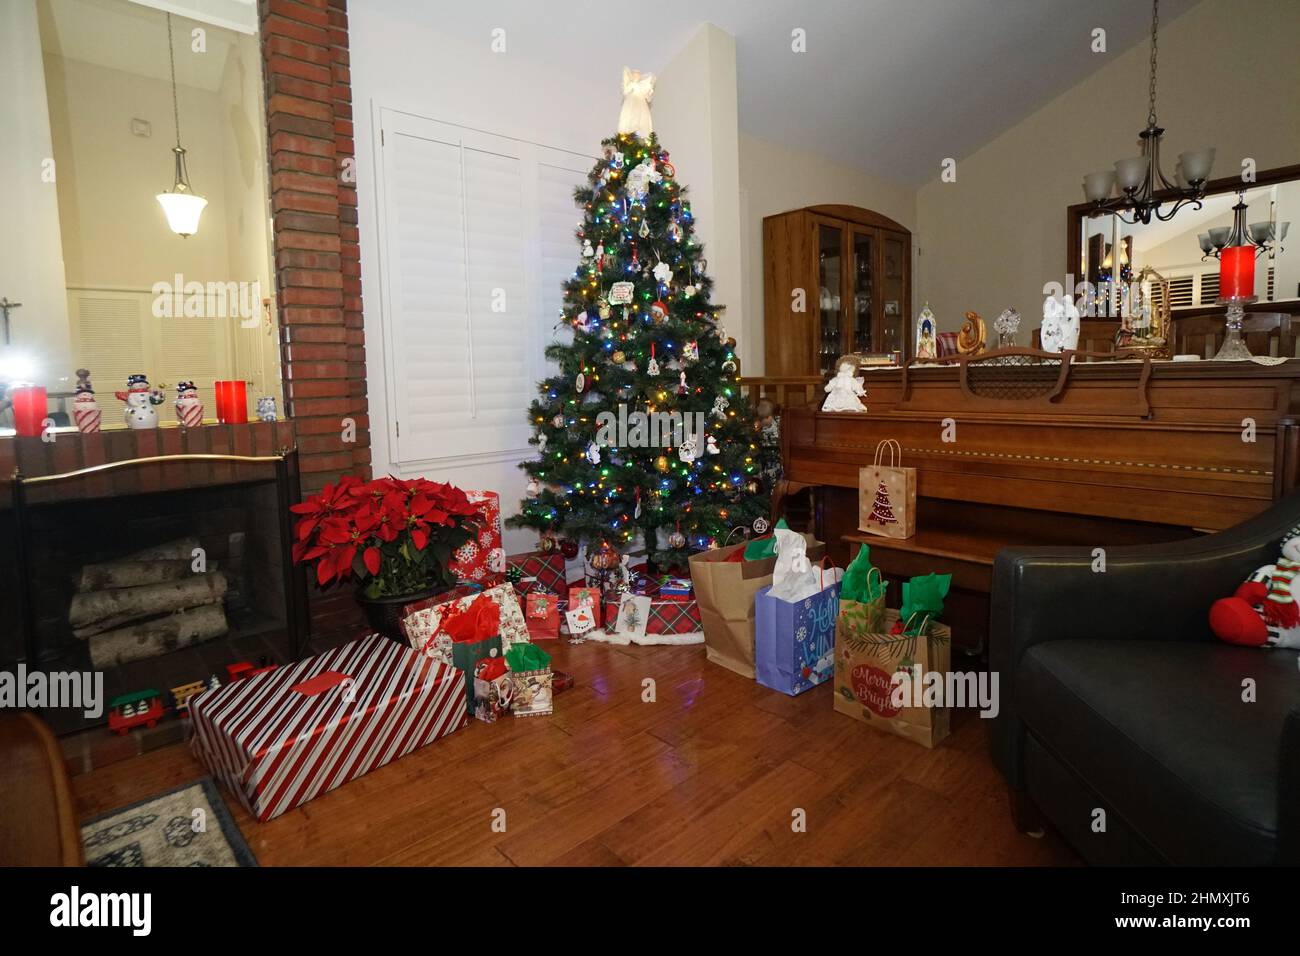 Christmas Tree with Presents Stock Photo